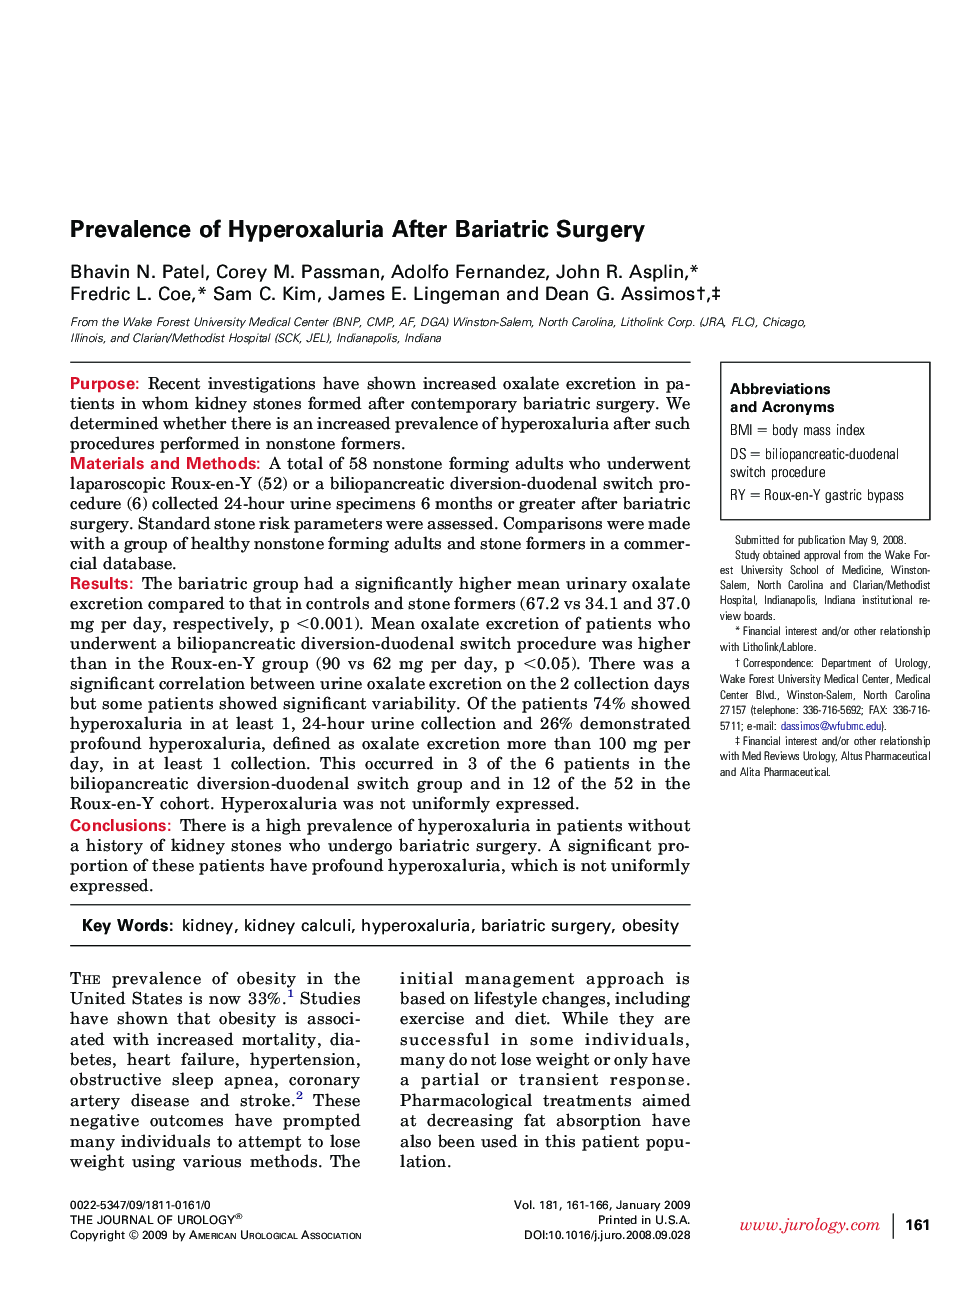 Prevalence of Hyperoxaluria After Bariatric Surgery